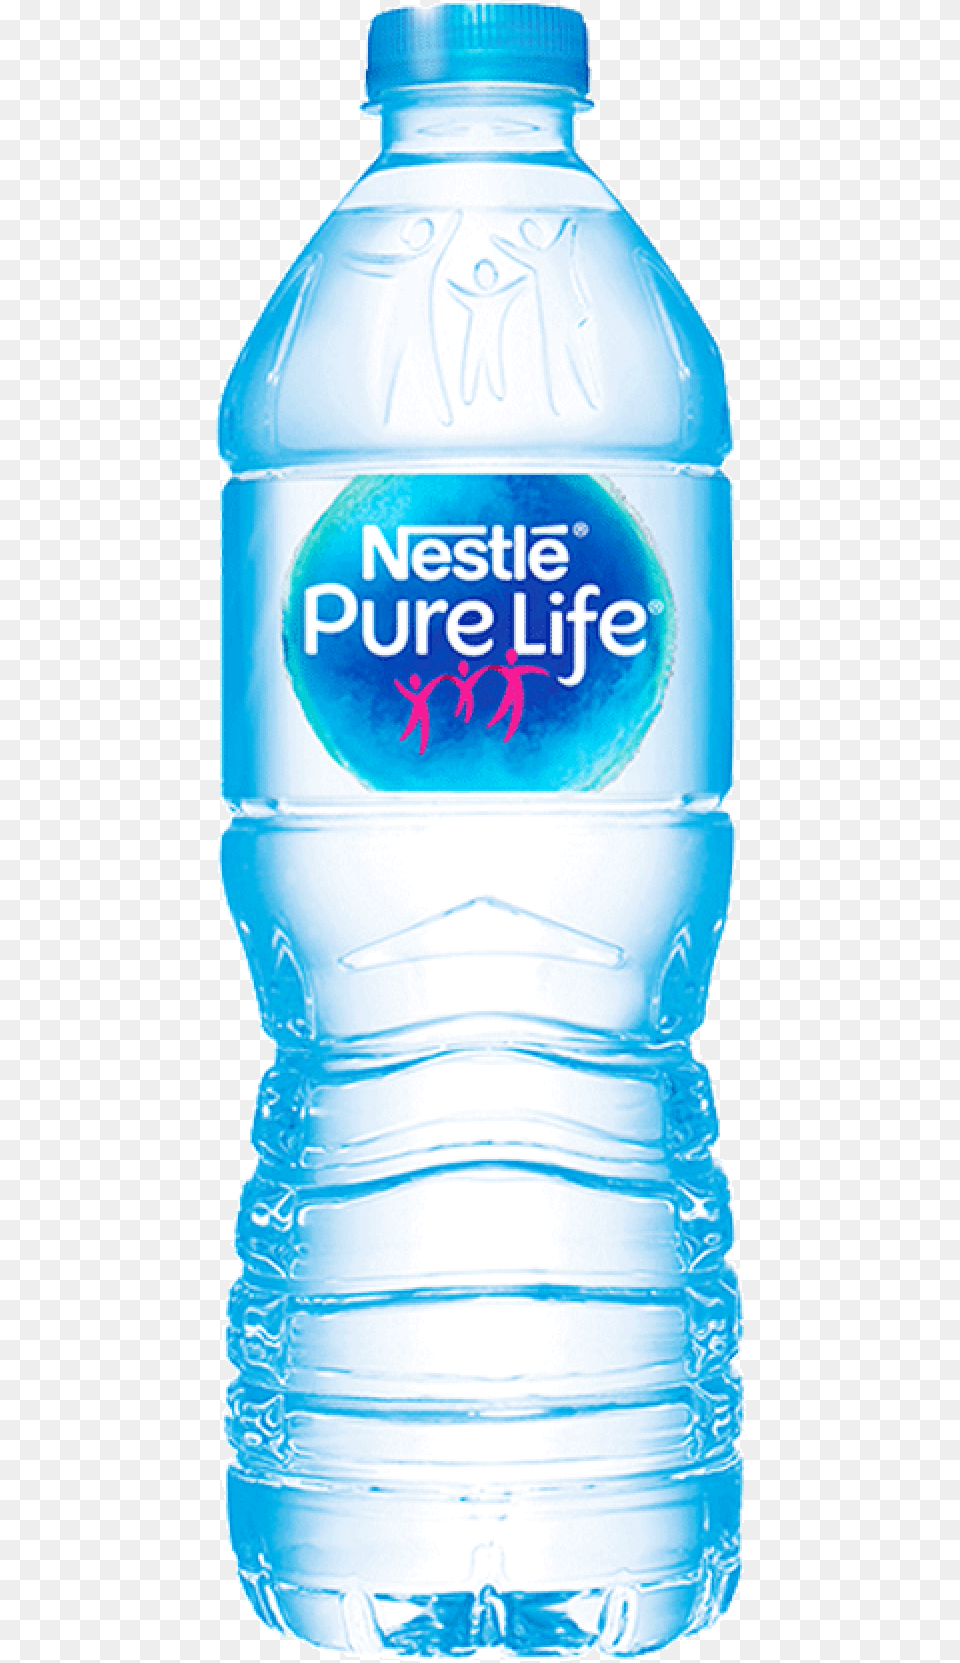 Nestle Water Pure Life 500 Ml Nestle Water Bottle, Beverage, Mineral Water, Water Bottle, Shaker Free Transparent Png